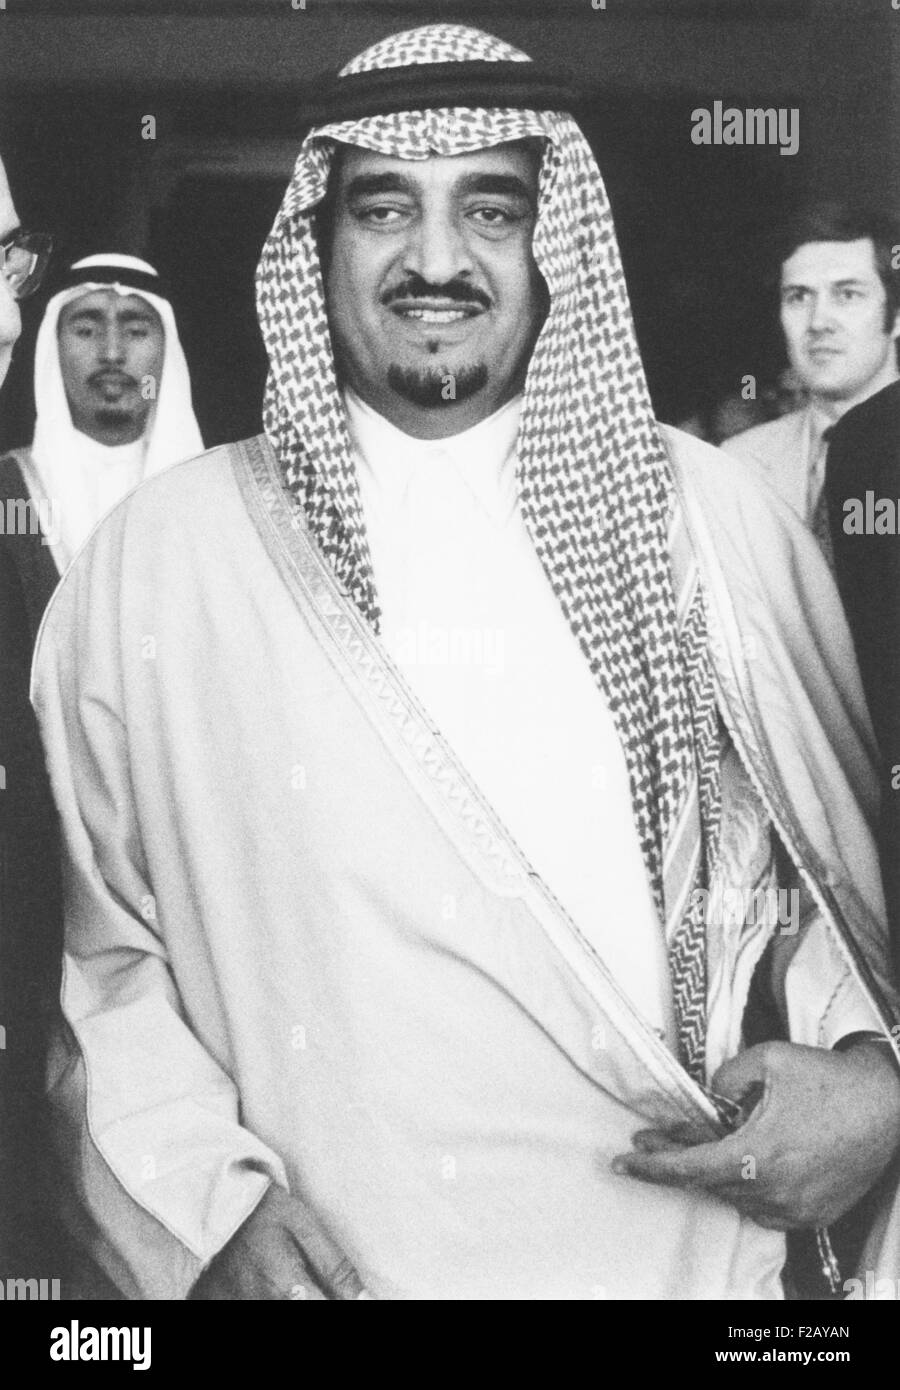 Saudi Arabia's Crown Prince Fahd, March 27, 1975. Fahd reigned as King from June 1982 until his death Aug. 2005. He was one of thirty-seven sons of Saudi founder Ibn Saud, and the fourth of his five sons who ruled the Kingdom (Saud, Faisal, Khalid, Fahd, and Abdullah). (CSU 2015 9 809) Stock Photo